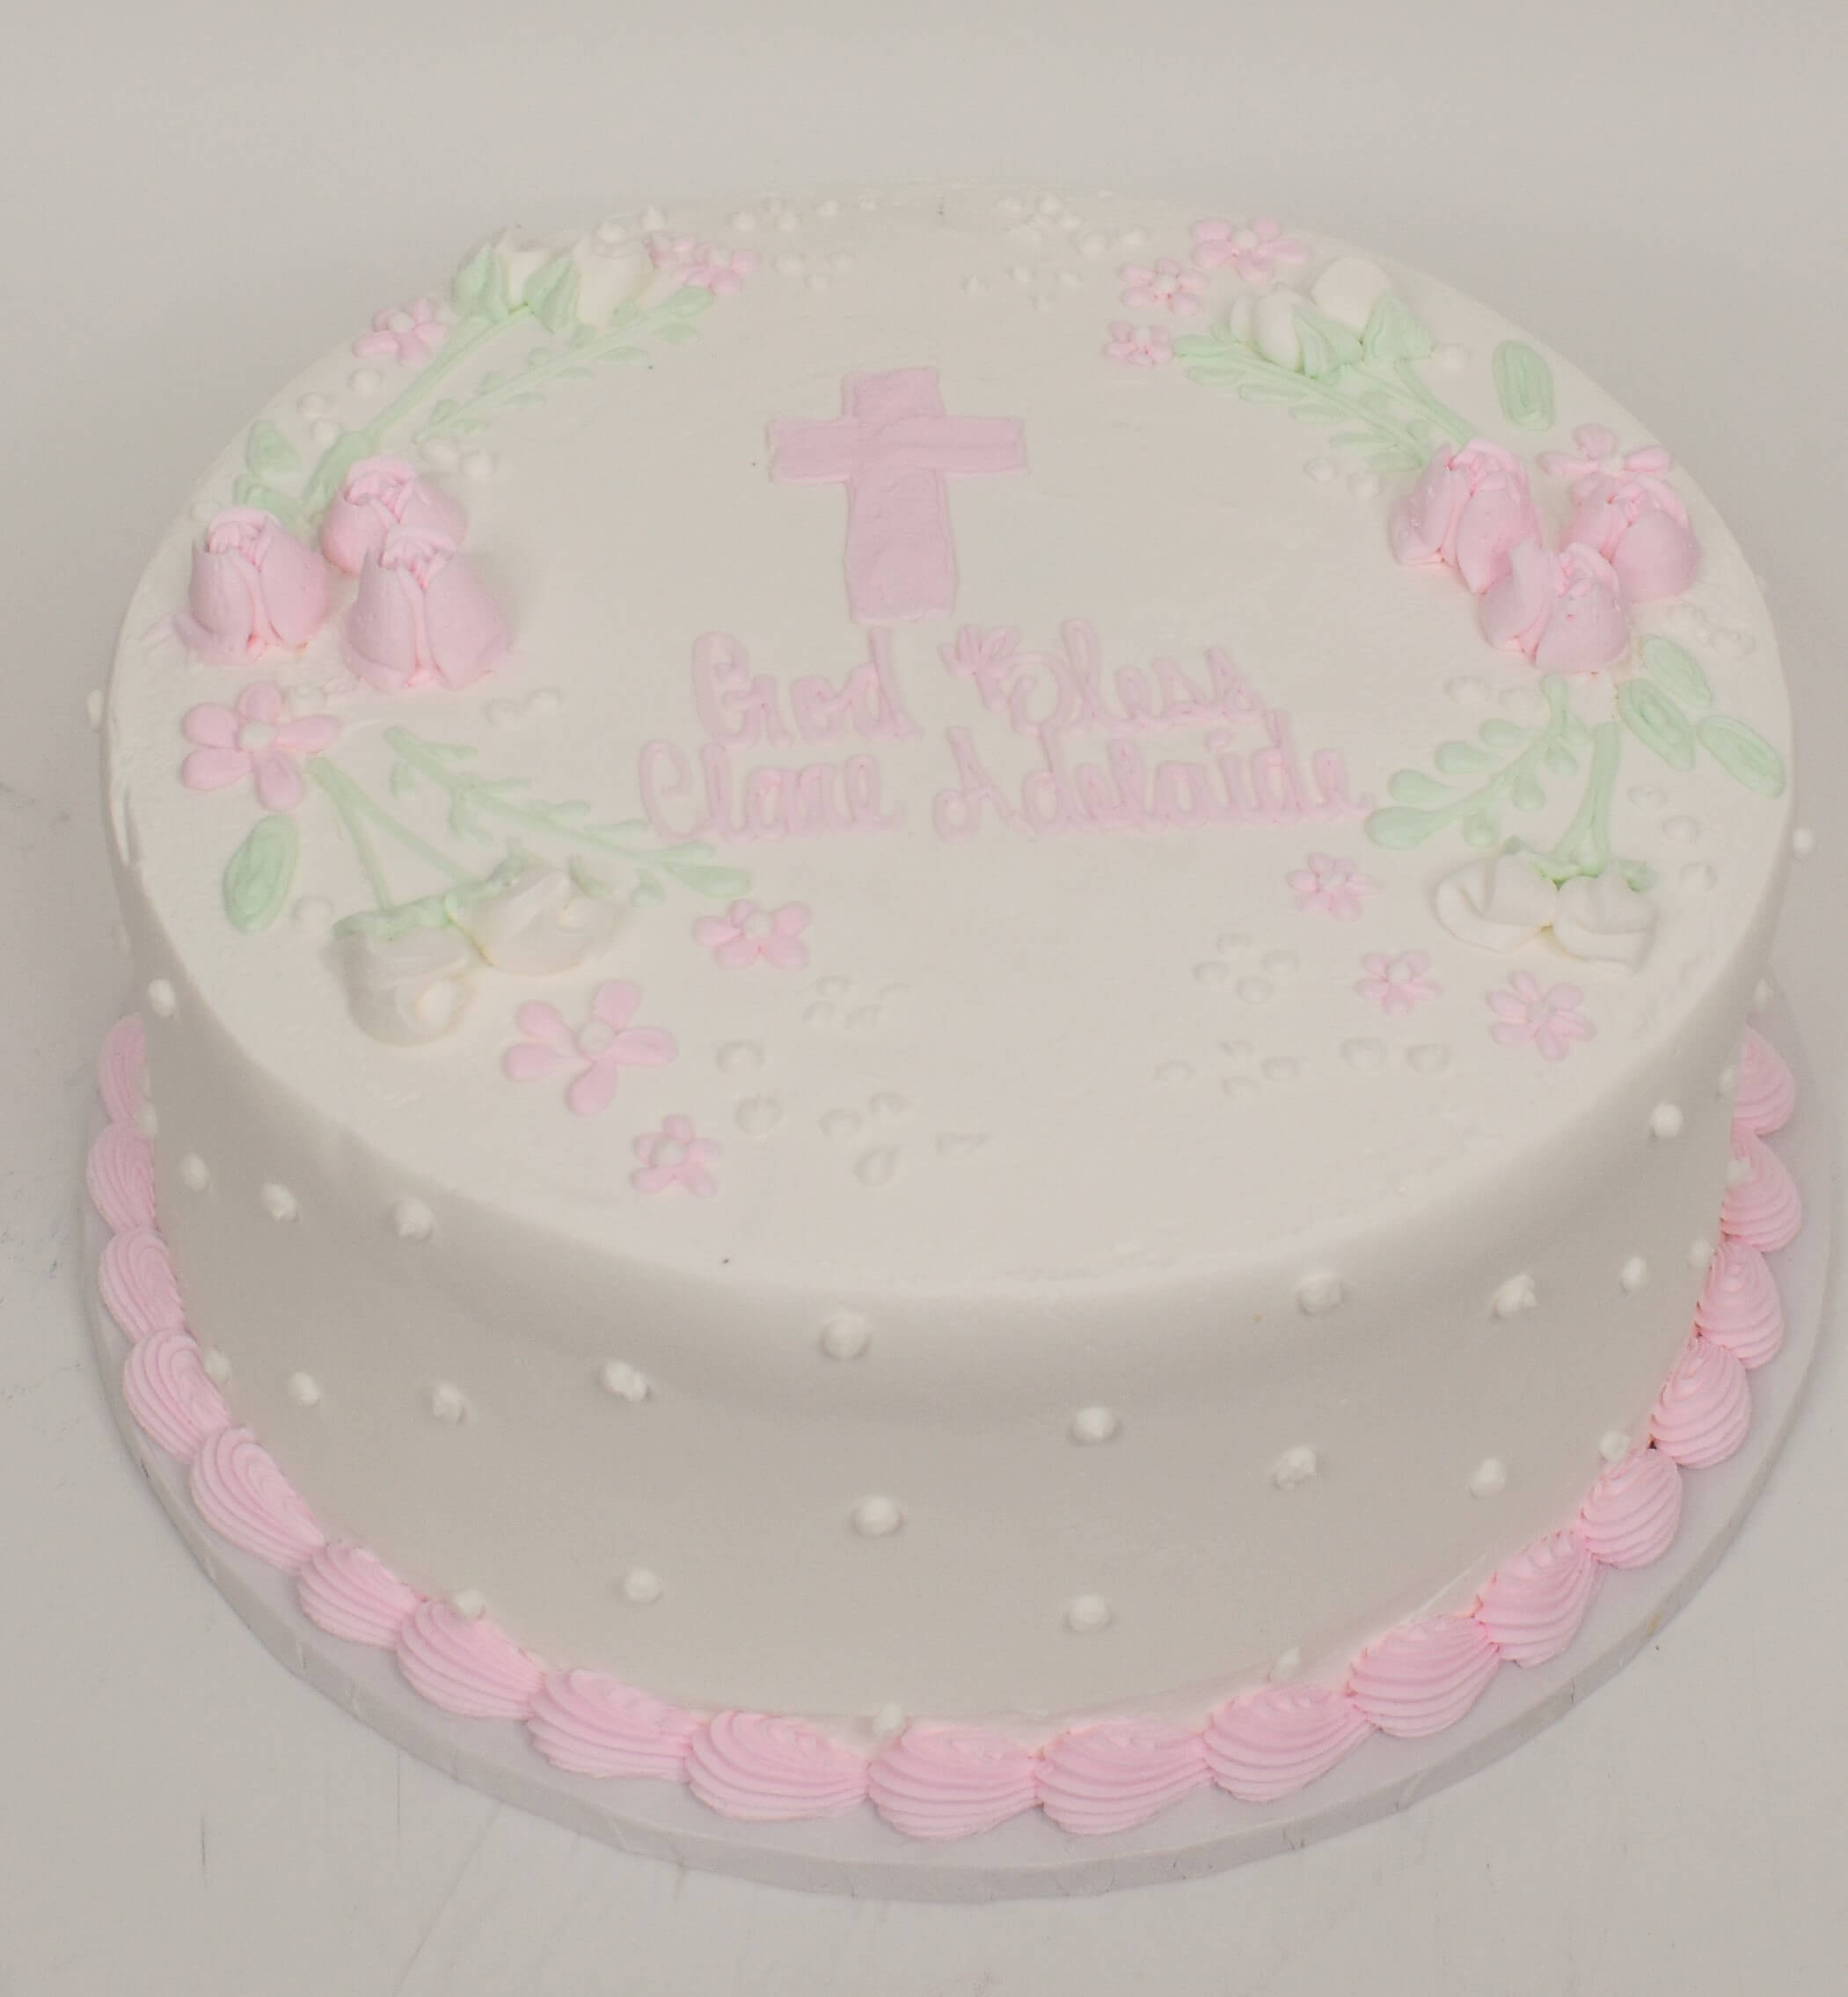 McArthur's Bakery Custom Cake with Pink Cross, Pink Roses